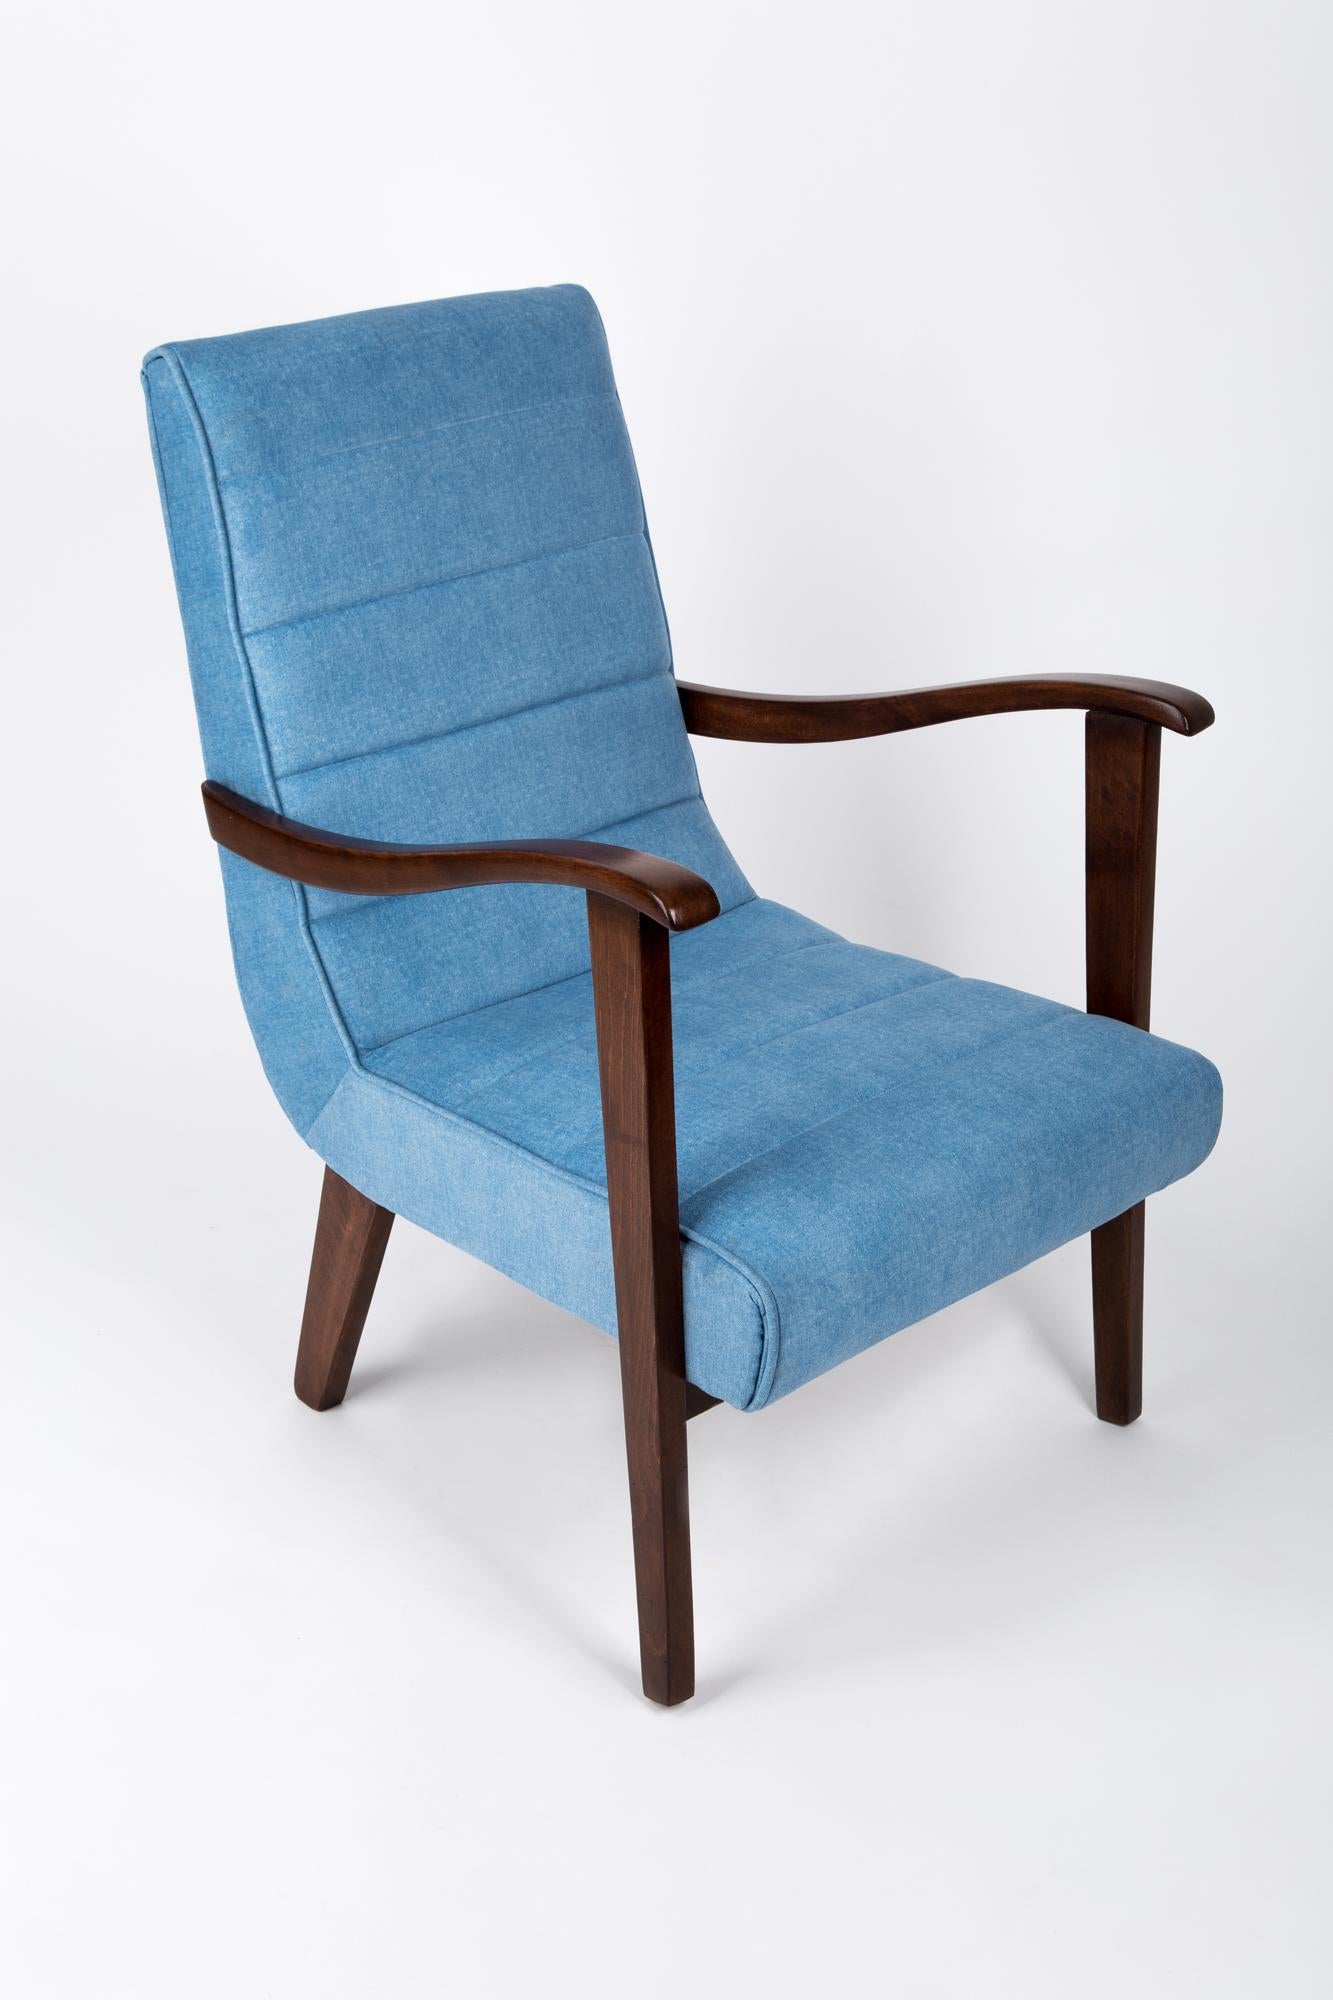 A vintage armchair, manufactured in the 1960s in Poland by the Prudnik Furniture Factory. The armchair is after full upholstery and carpentry renovation. The upholstery structure resembles denim. The wooden structure is covered with a dark-brown